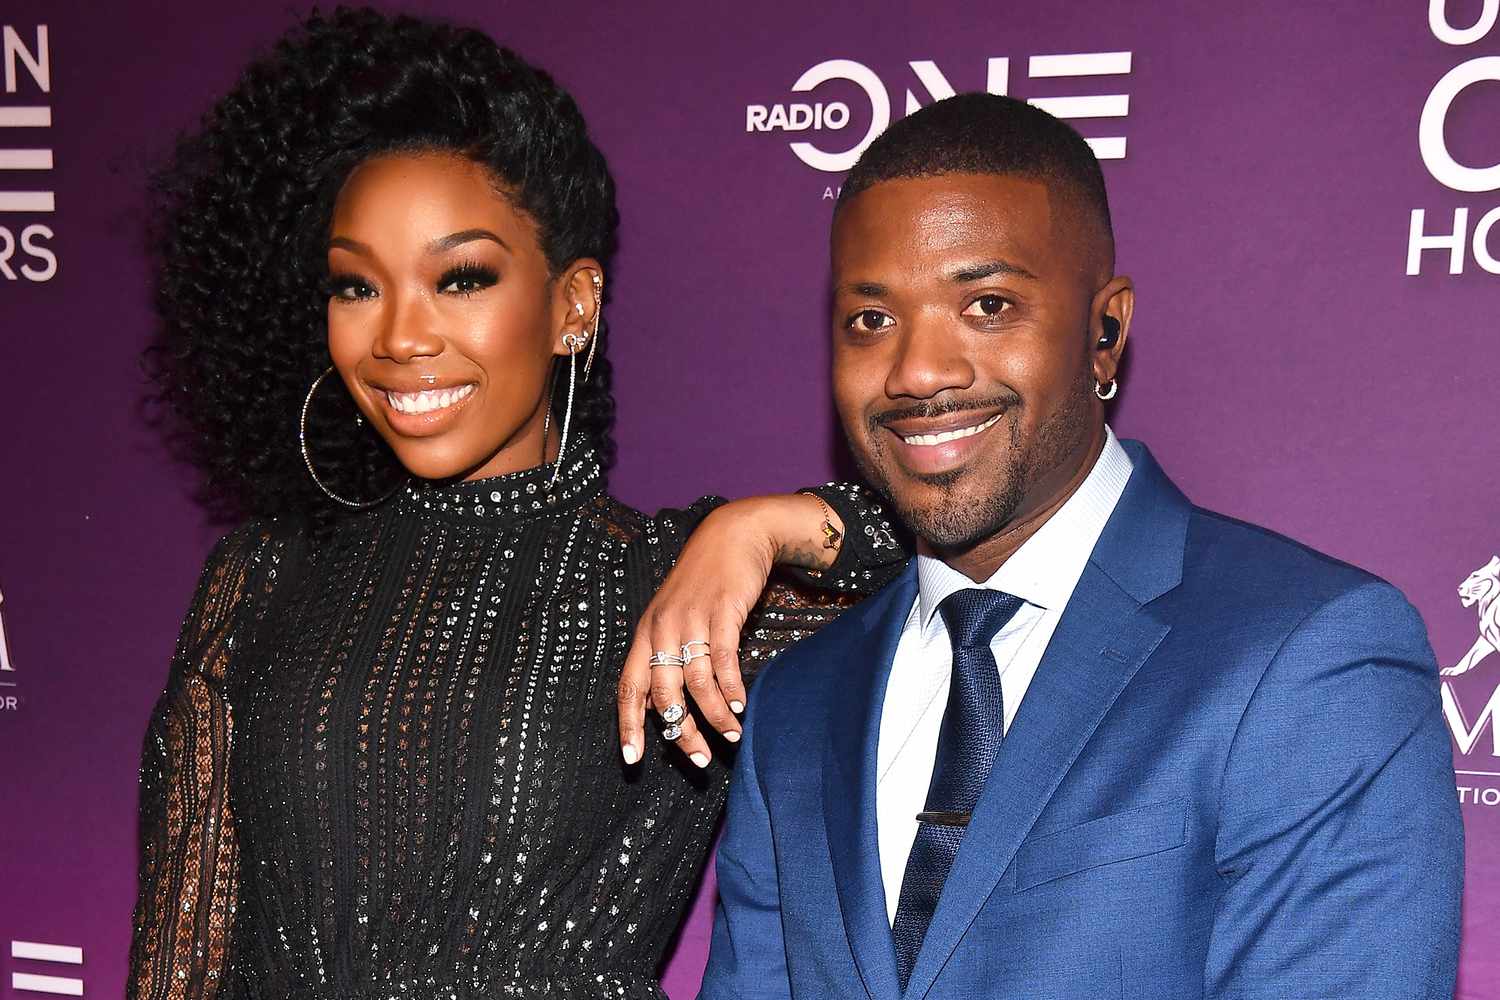 Ray J and Brandy: All About the Famous Siblings' Brother-Sister Bond